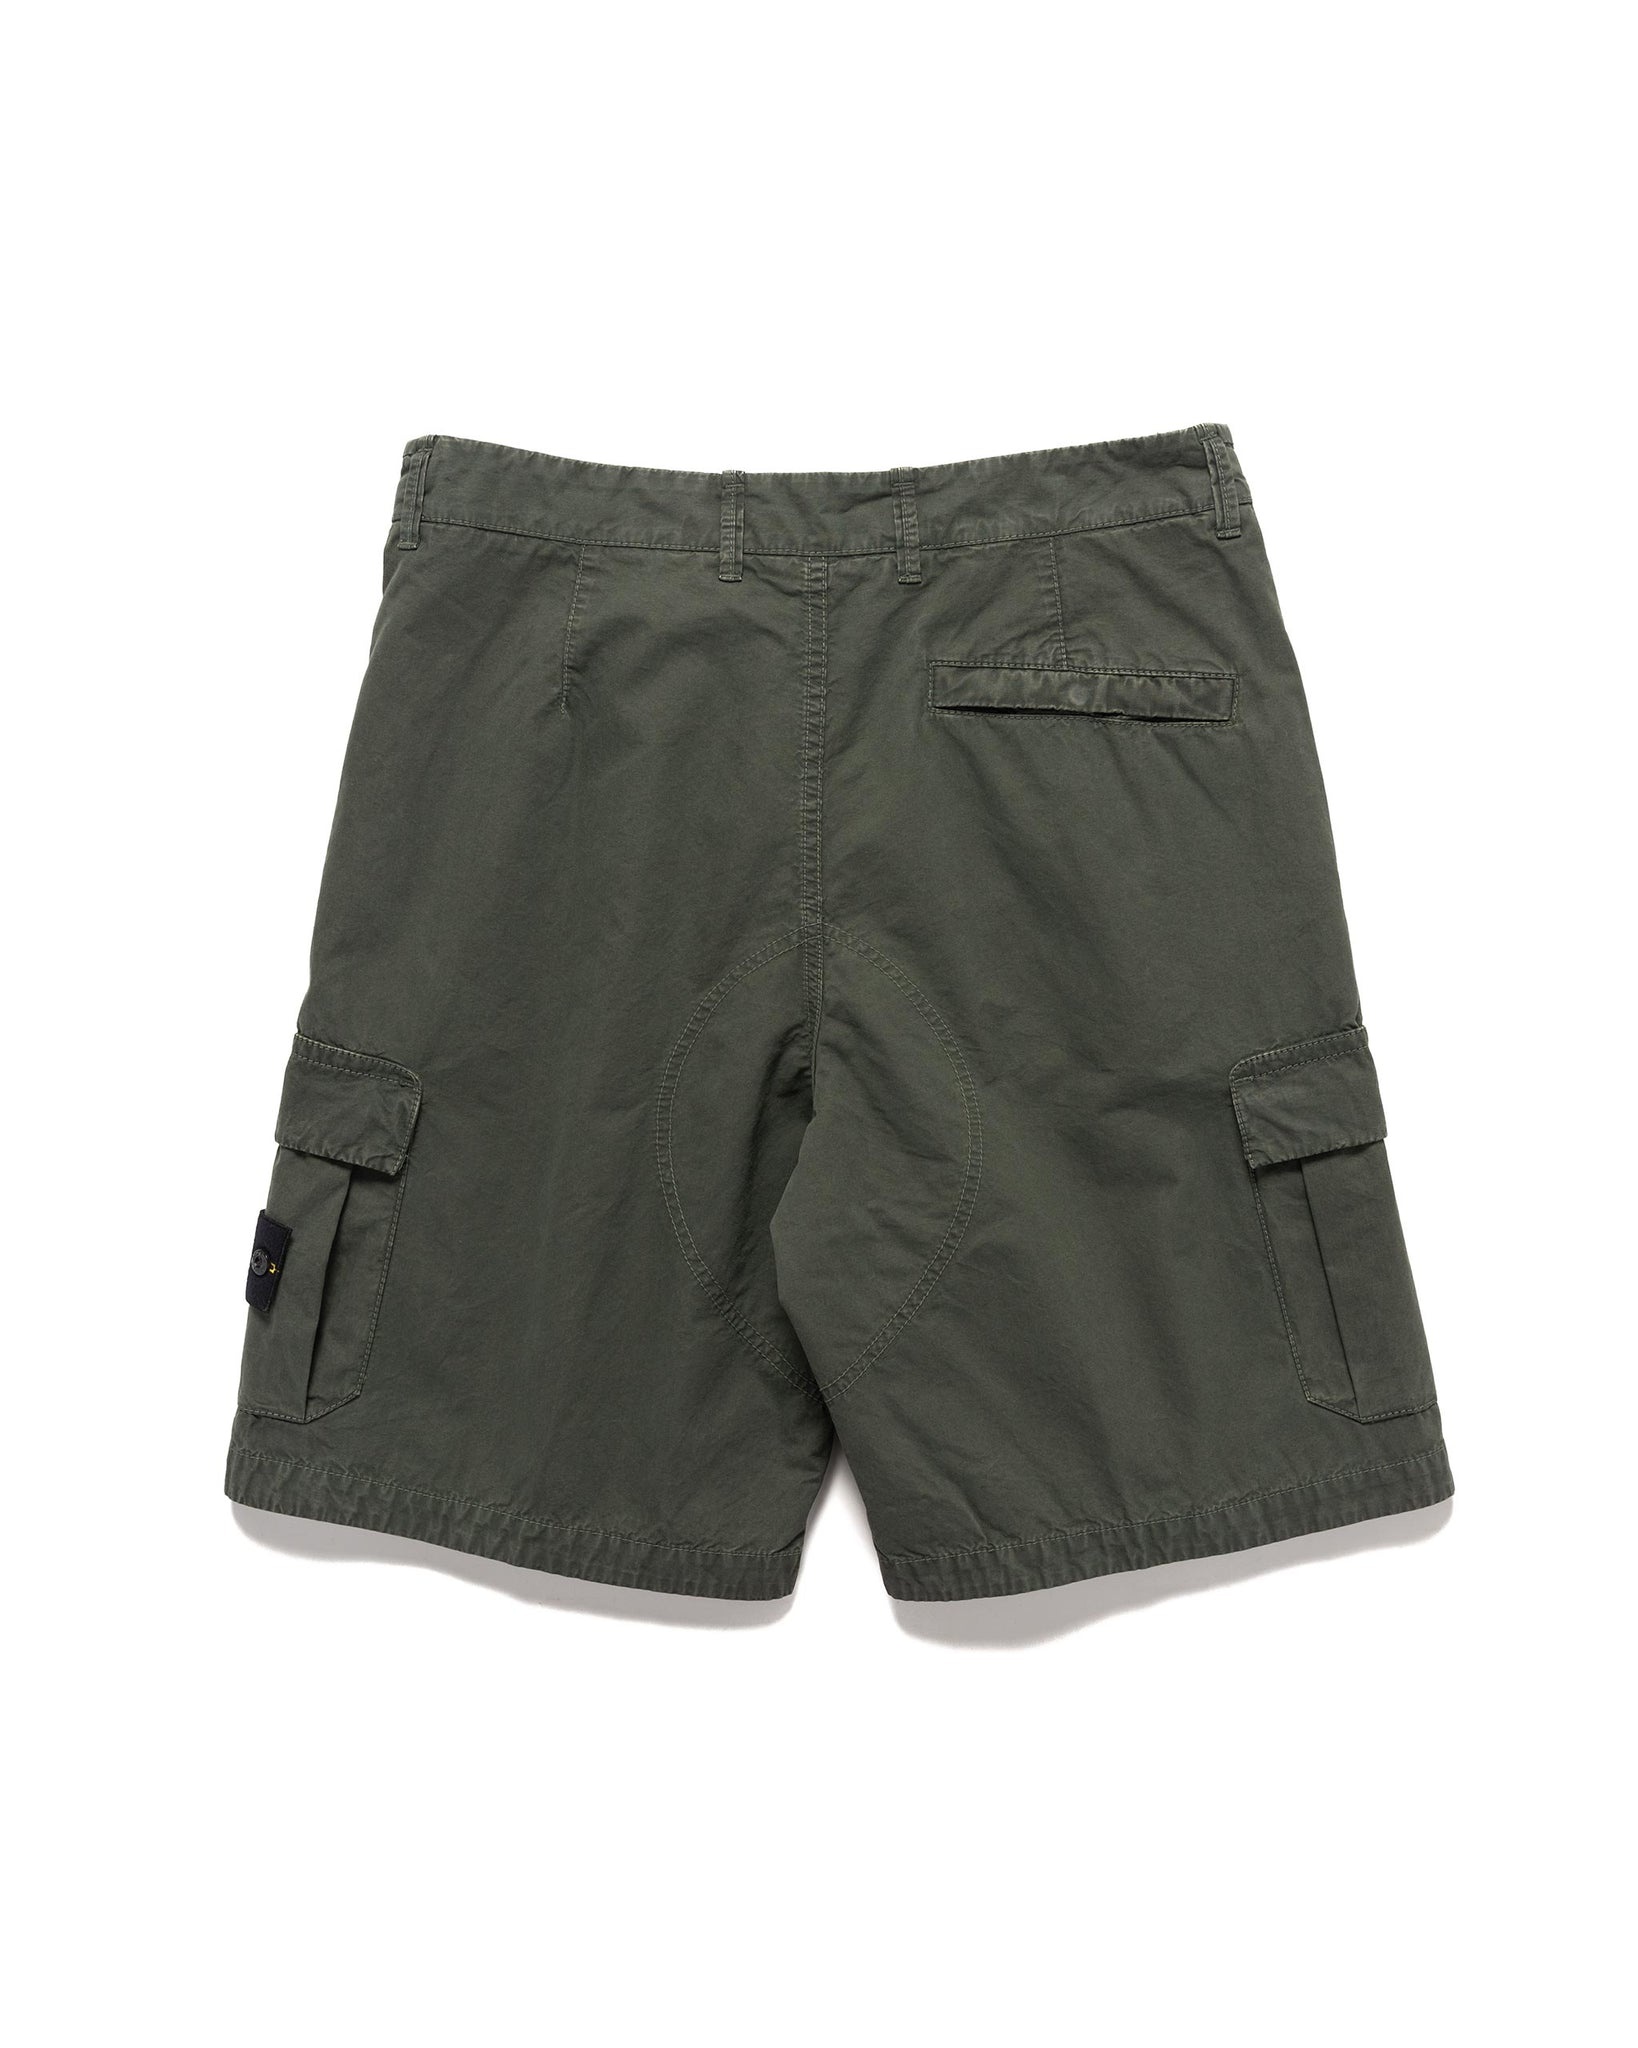 'Old' Treatment Loose Fit Bermuda Shorts Musk - 5